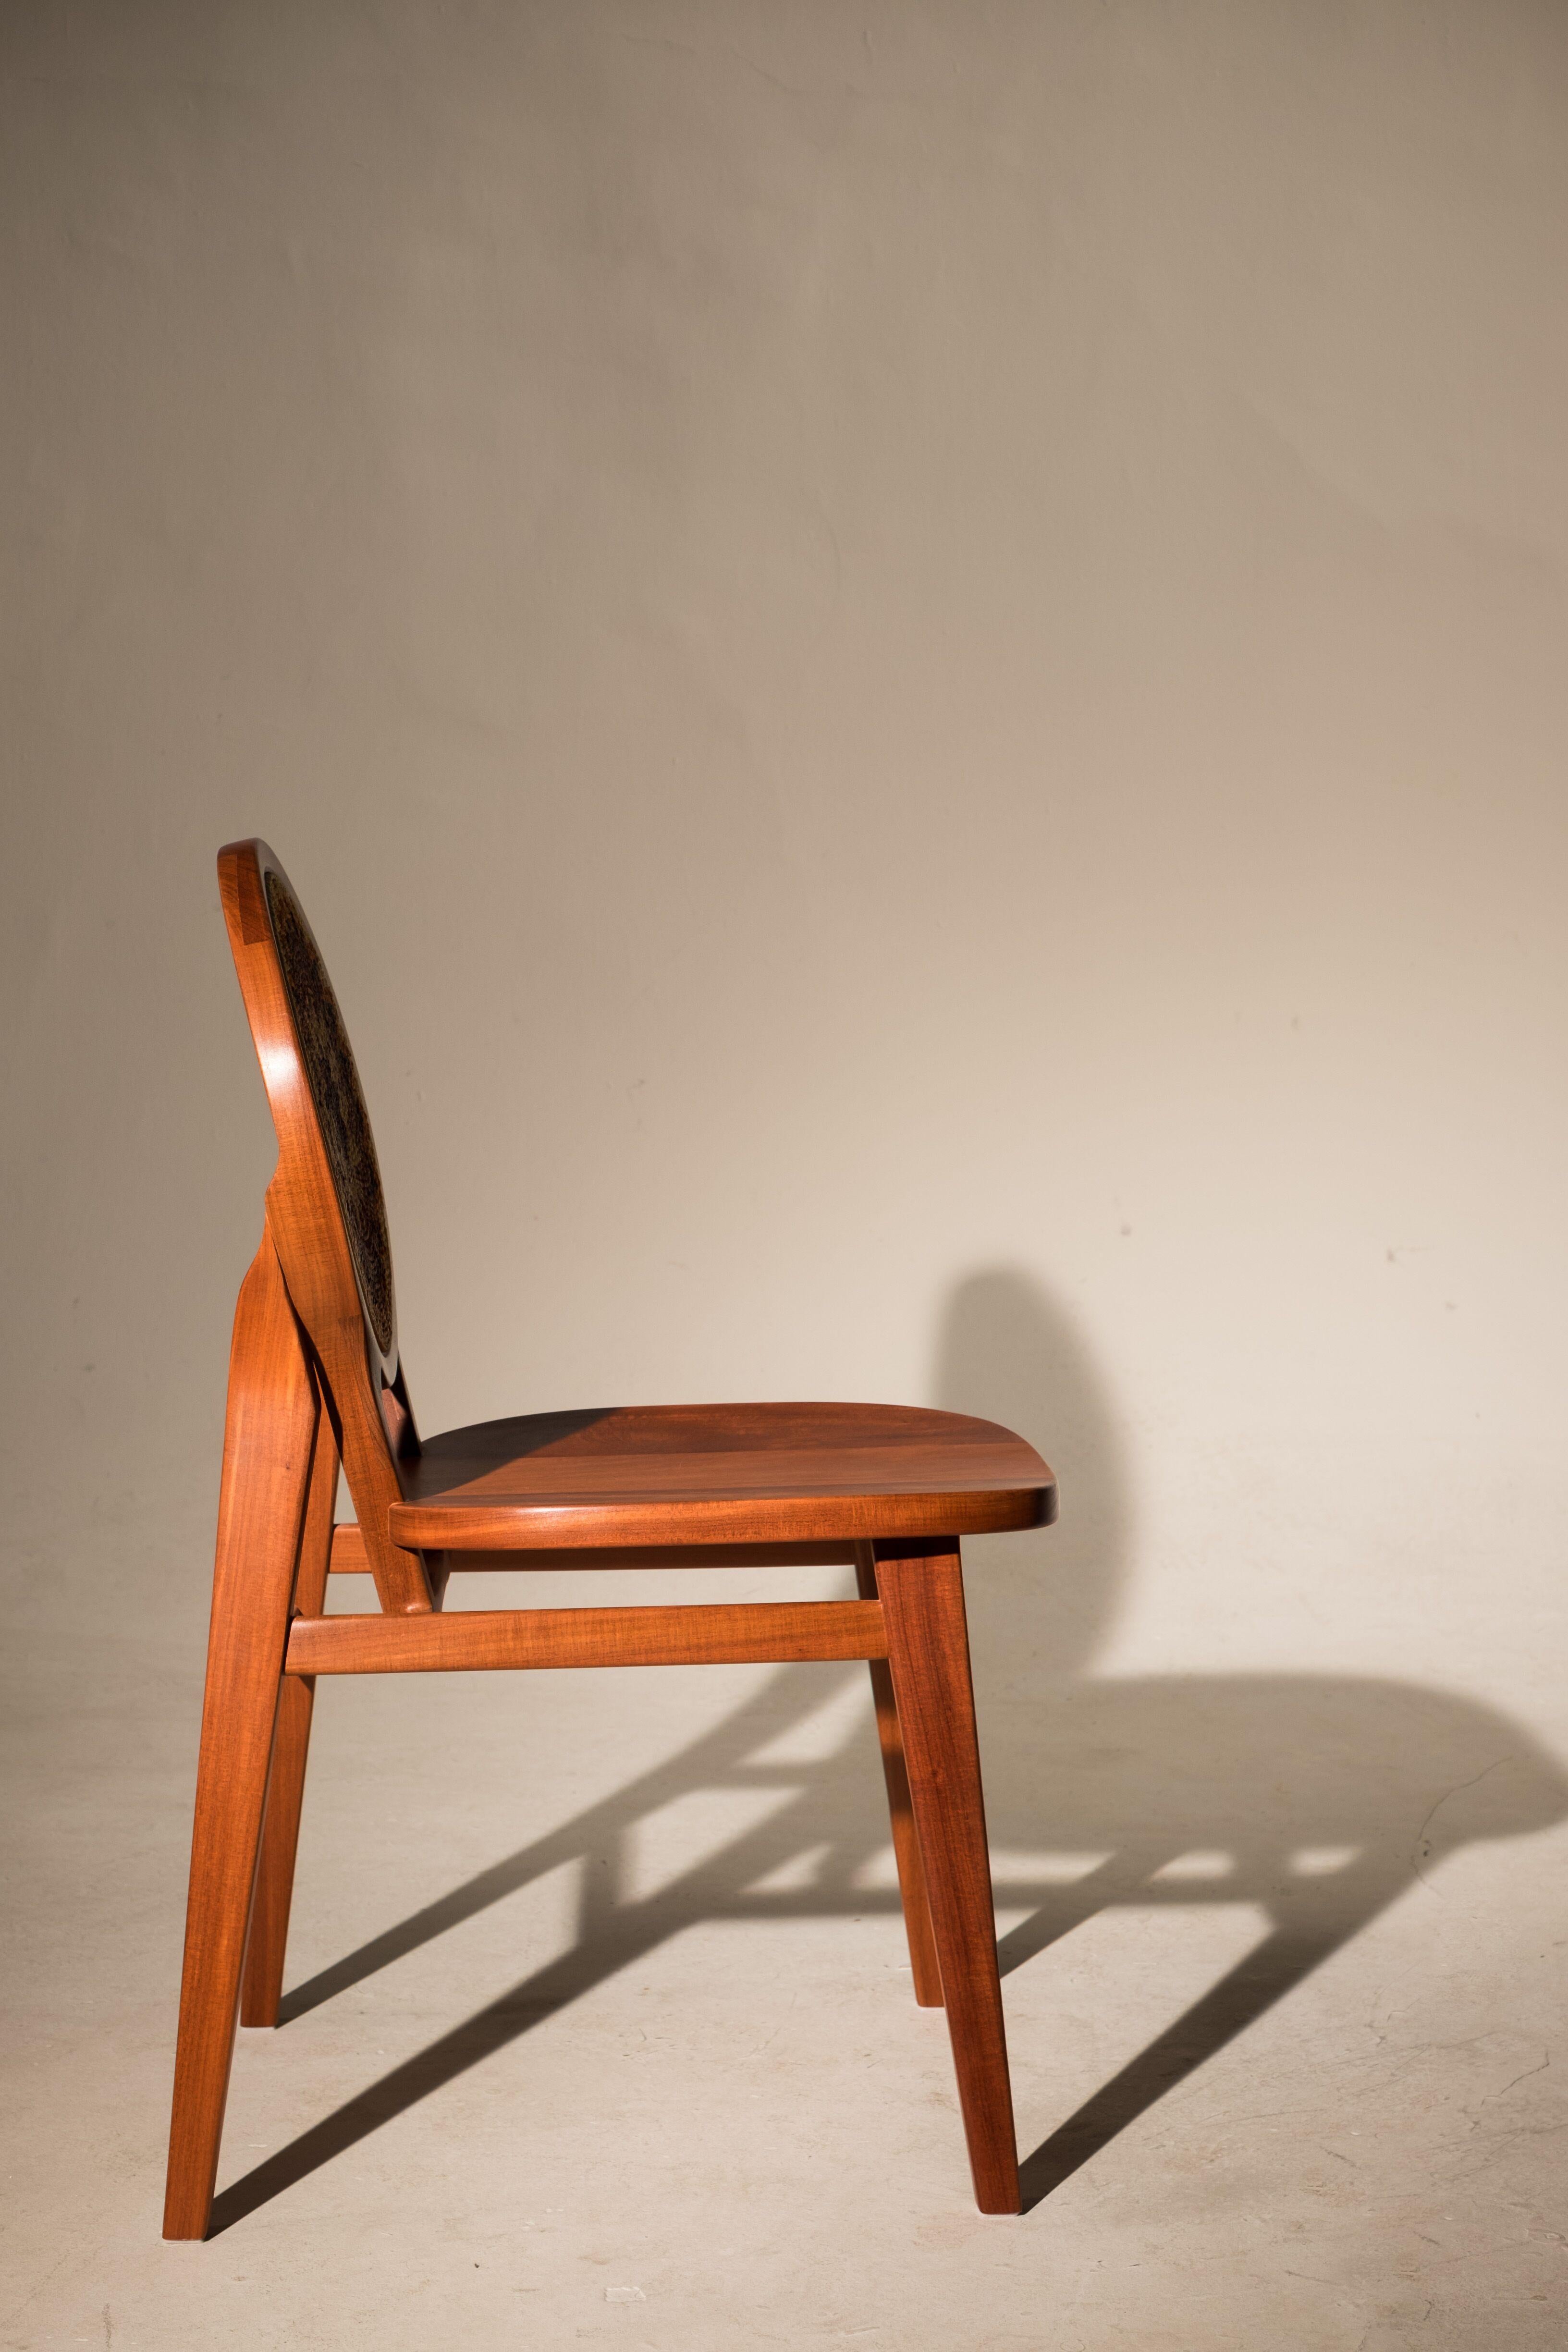 Unique design piece

The Cocar Chair, simple,  was first presented at MADE – Mercado, Arte, Design 2019 in São Paulo, Brazil and is part of the ALMA-RAIZ (Soul and Roots) Collection from Yankatu.

The ALMA-Raiz collection is born from the deepening